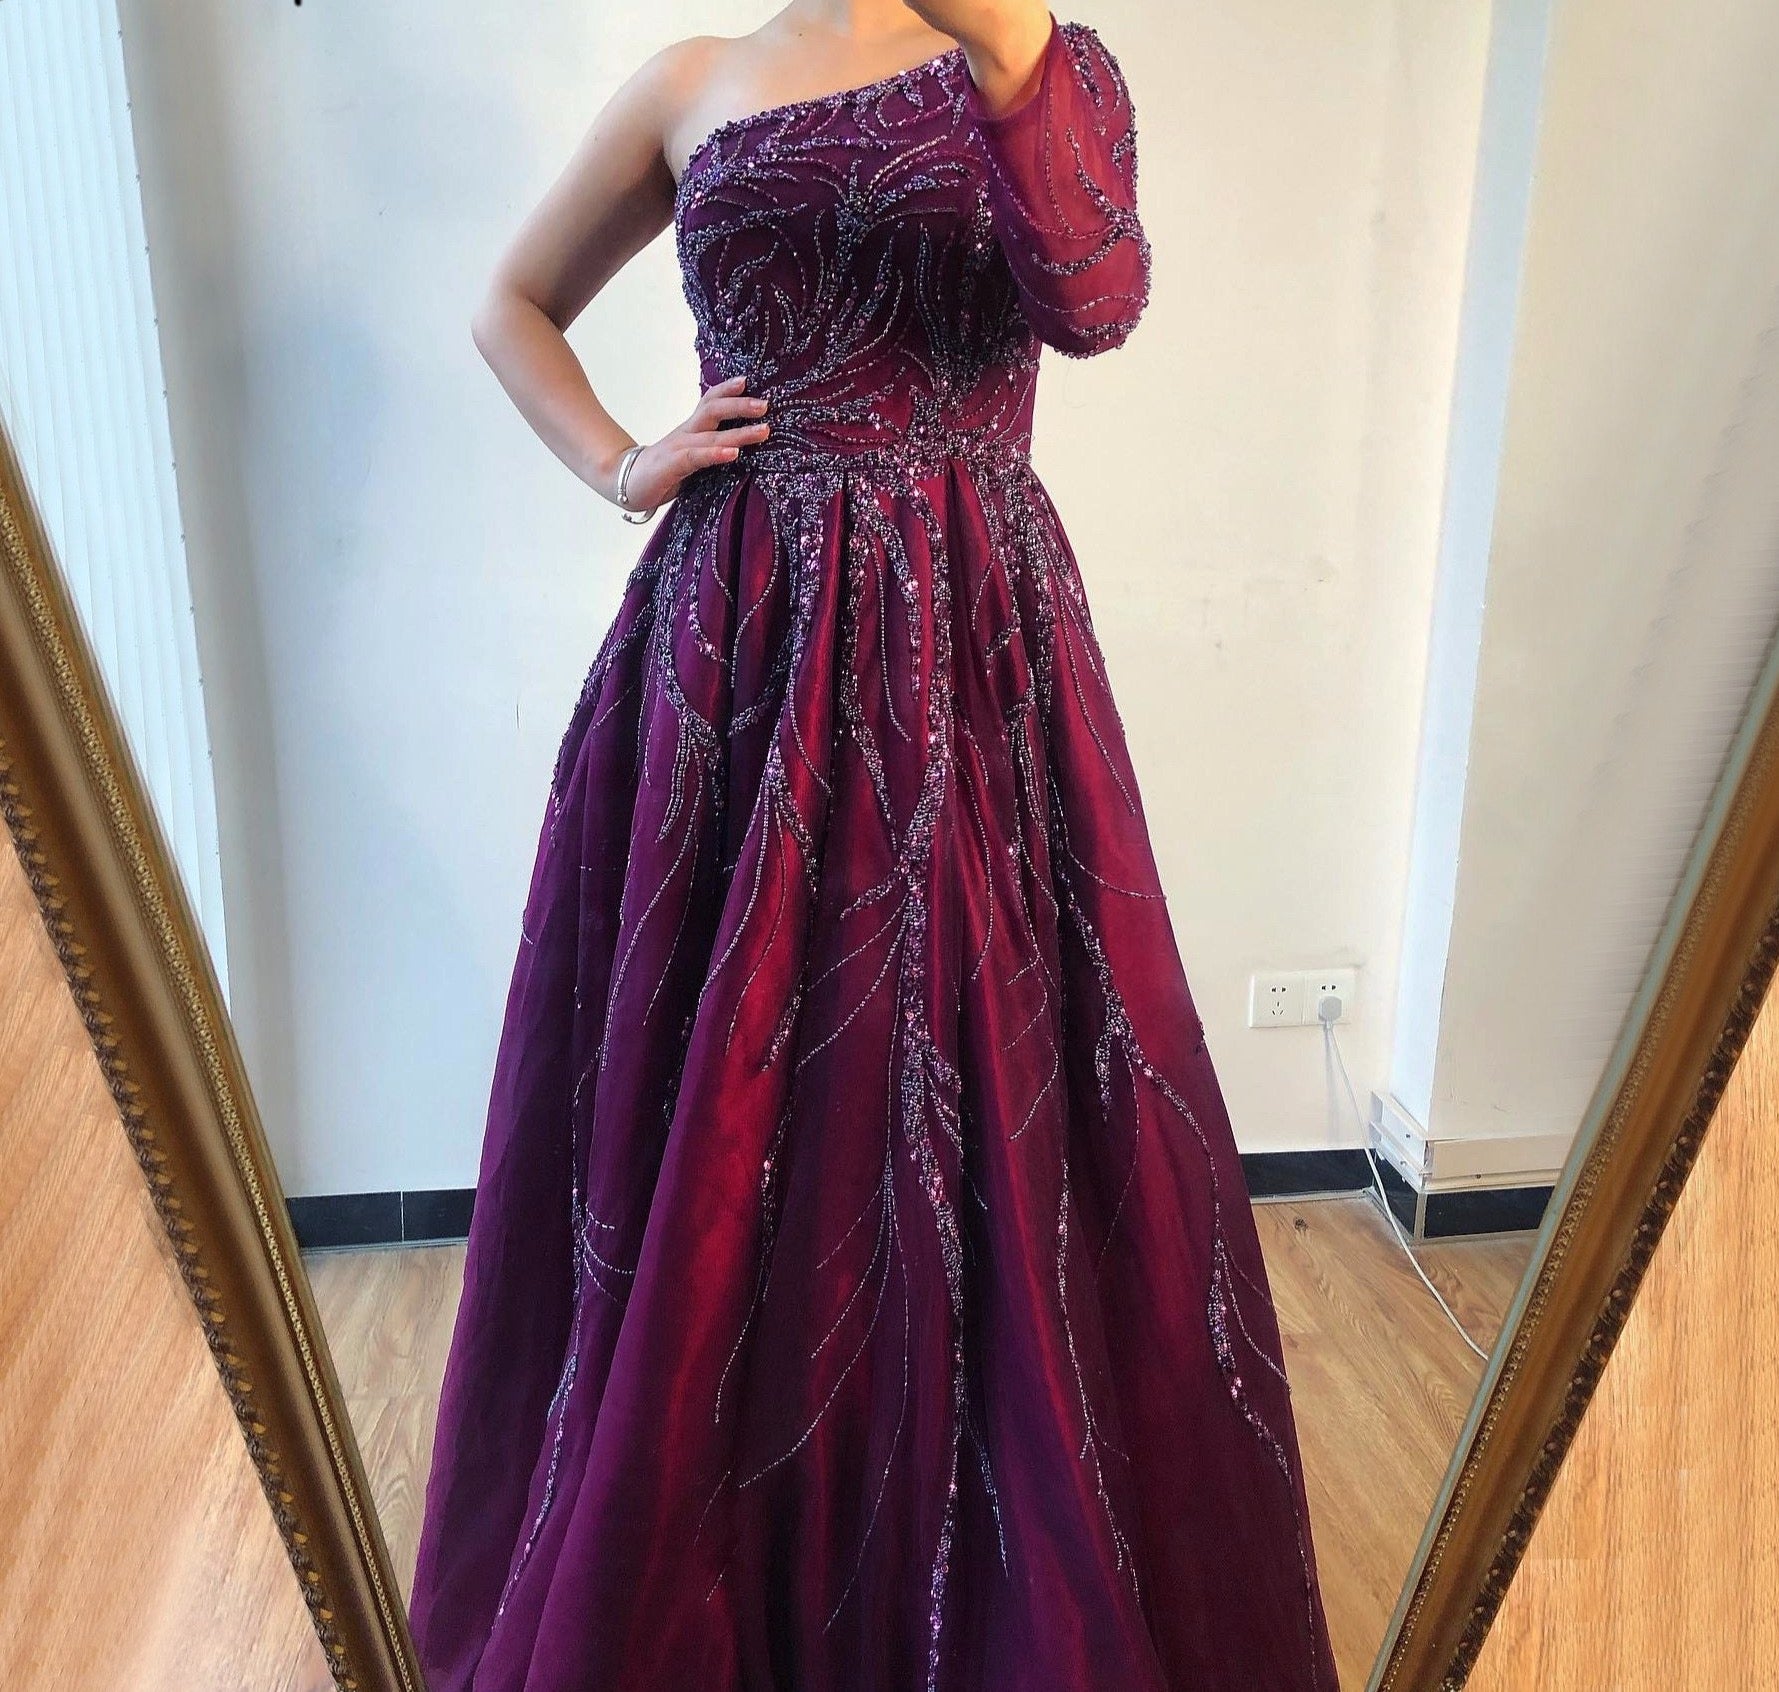 Dubai Design Wine Red A-Line Prom Dresses One-Shoulder Sexy Luxury Prom Gowns 2020 - LiveTrendsX